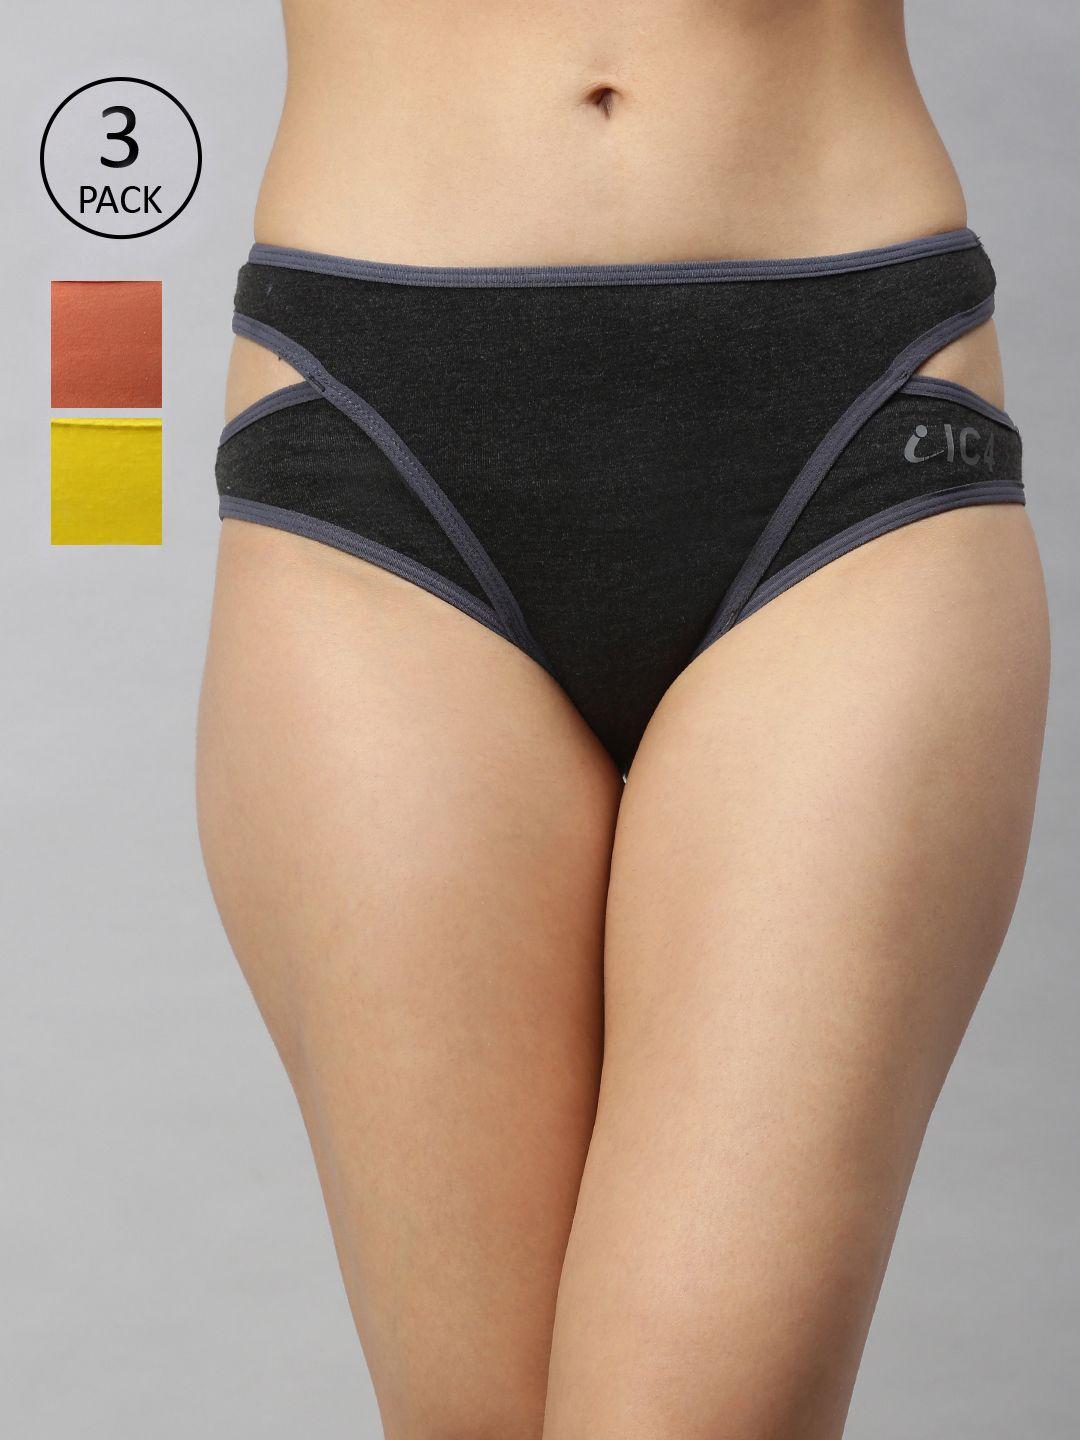 ic4 women pack of 3 designer hipster briefs 0coy1004p3